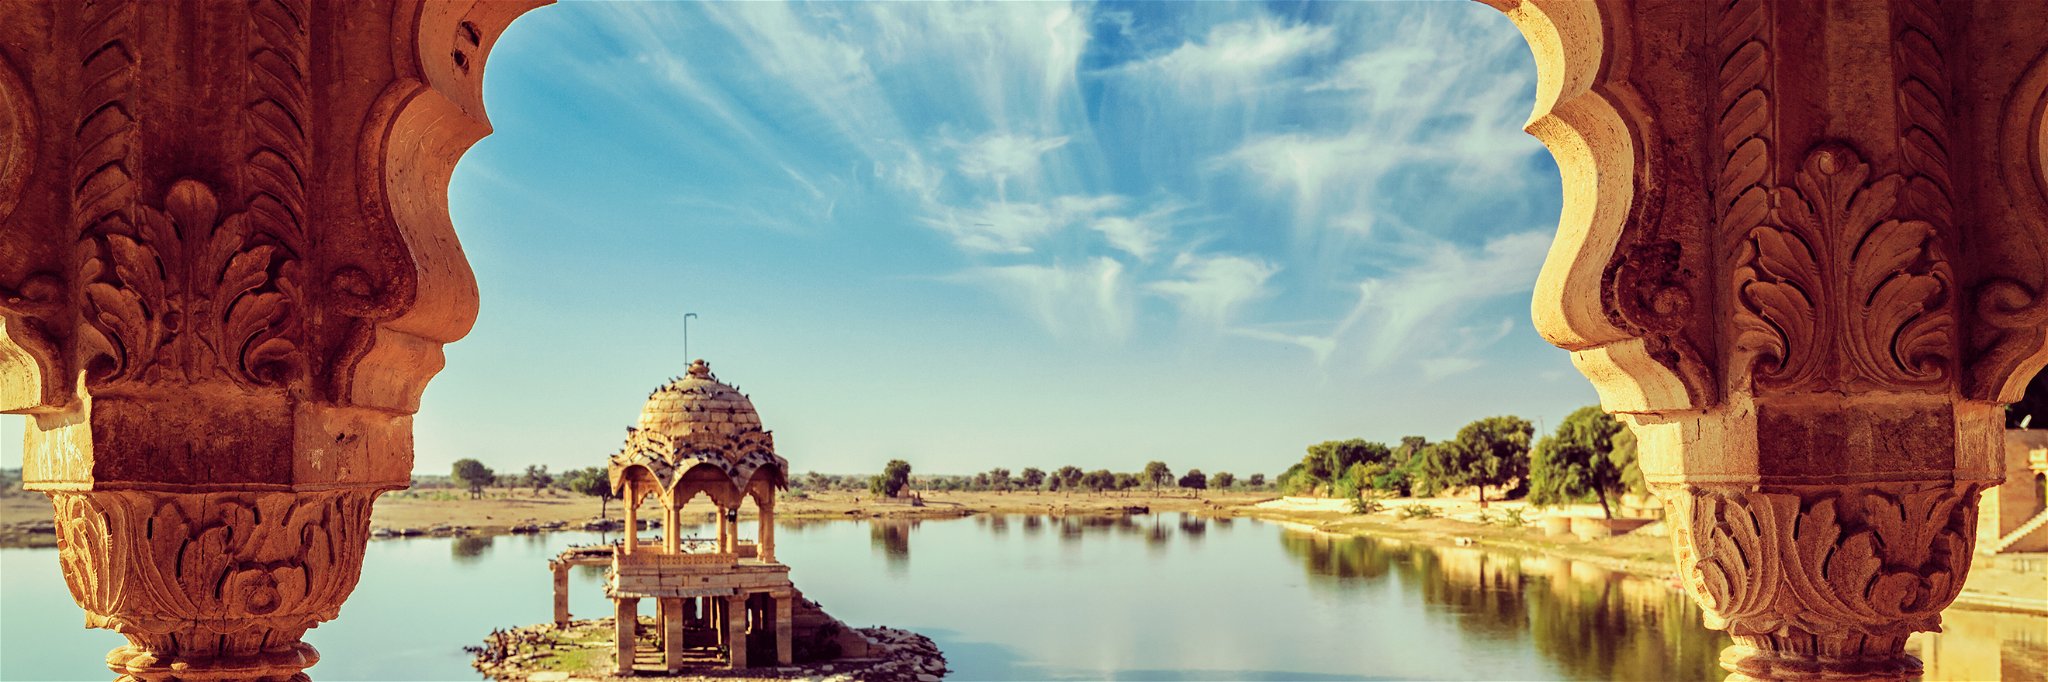 The Gadi Sagar lake is a&nbsp;famous&nbsp;tourist attraction in North India